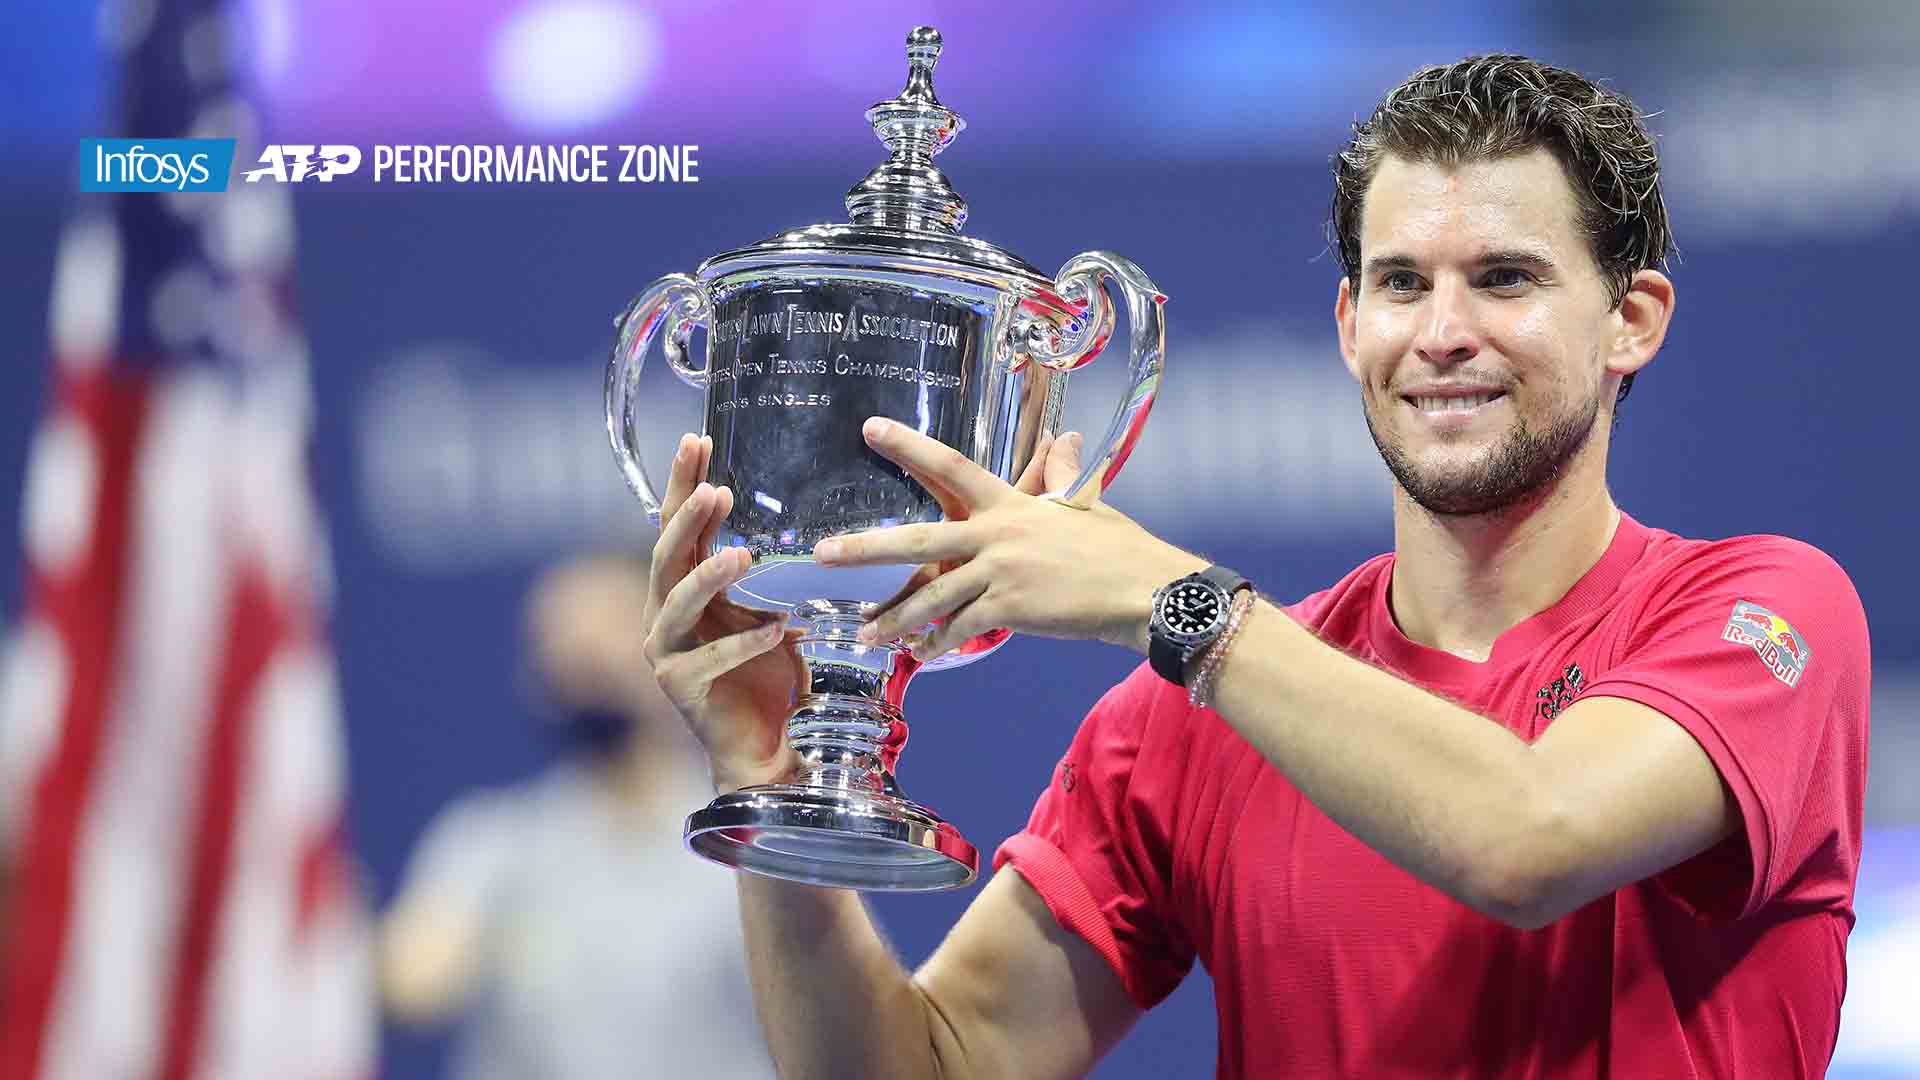 Dominic Thiem captured his maiden Grand Slam title at the 2020 US Open.